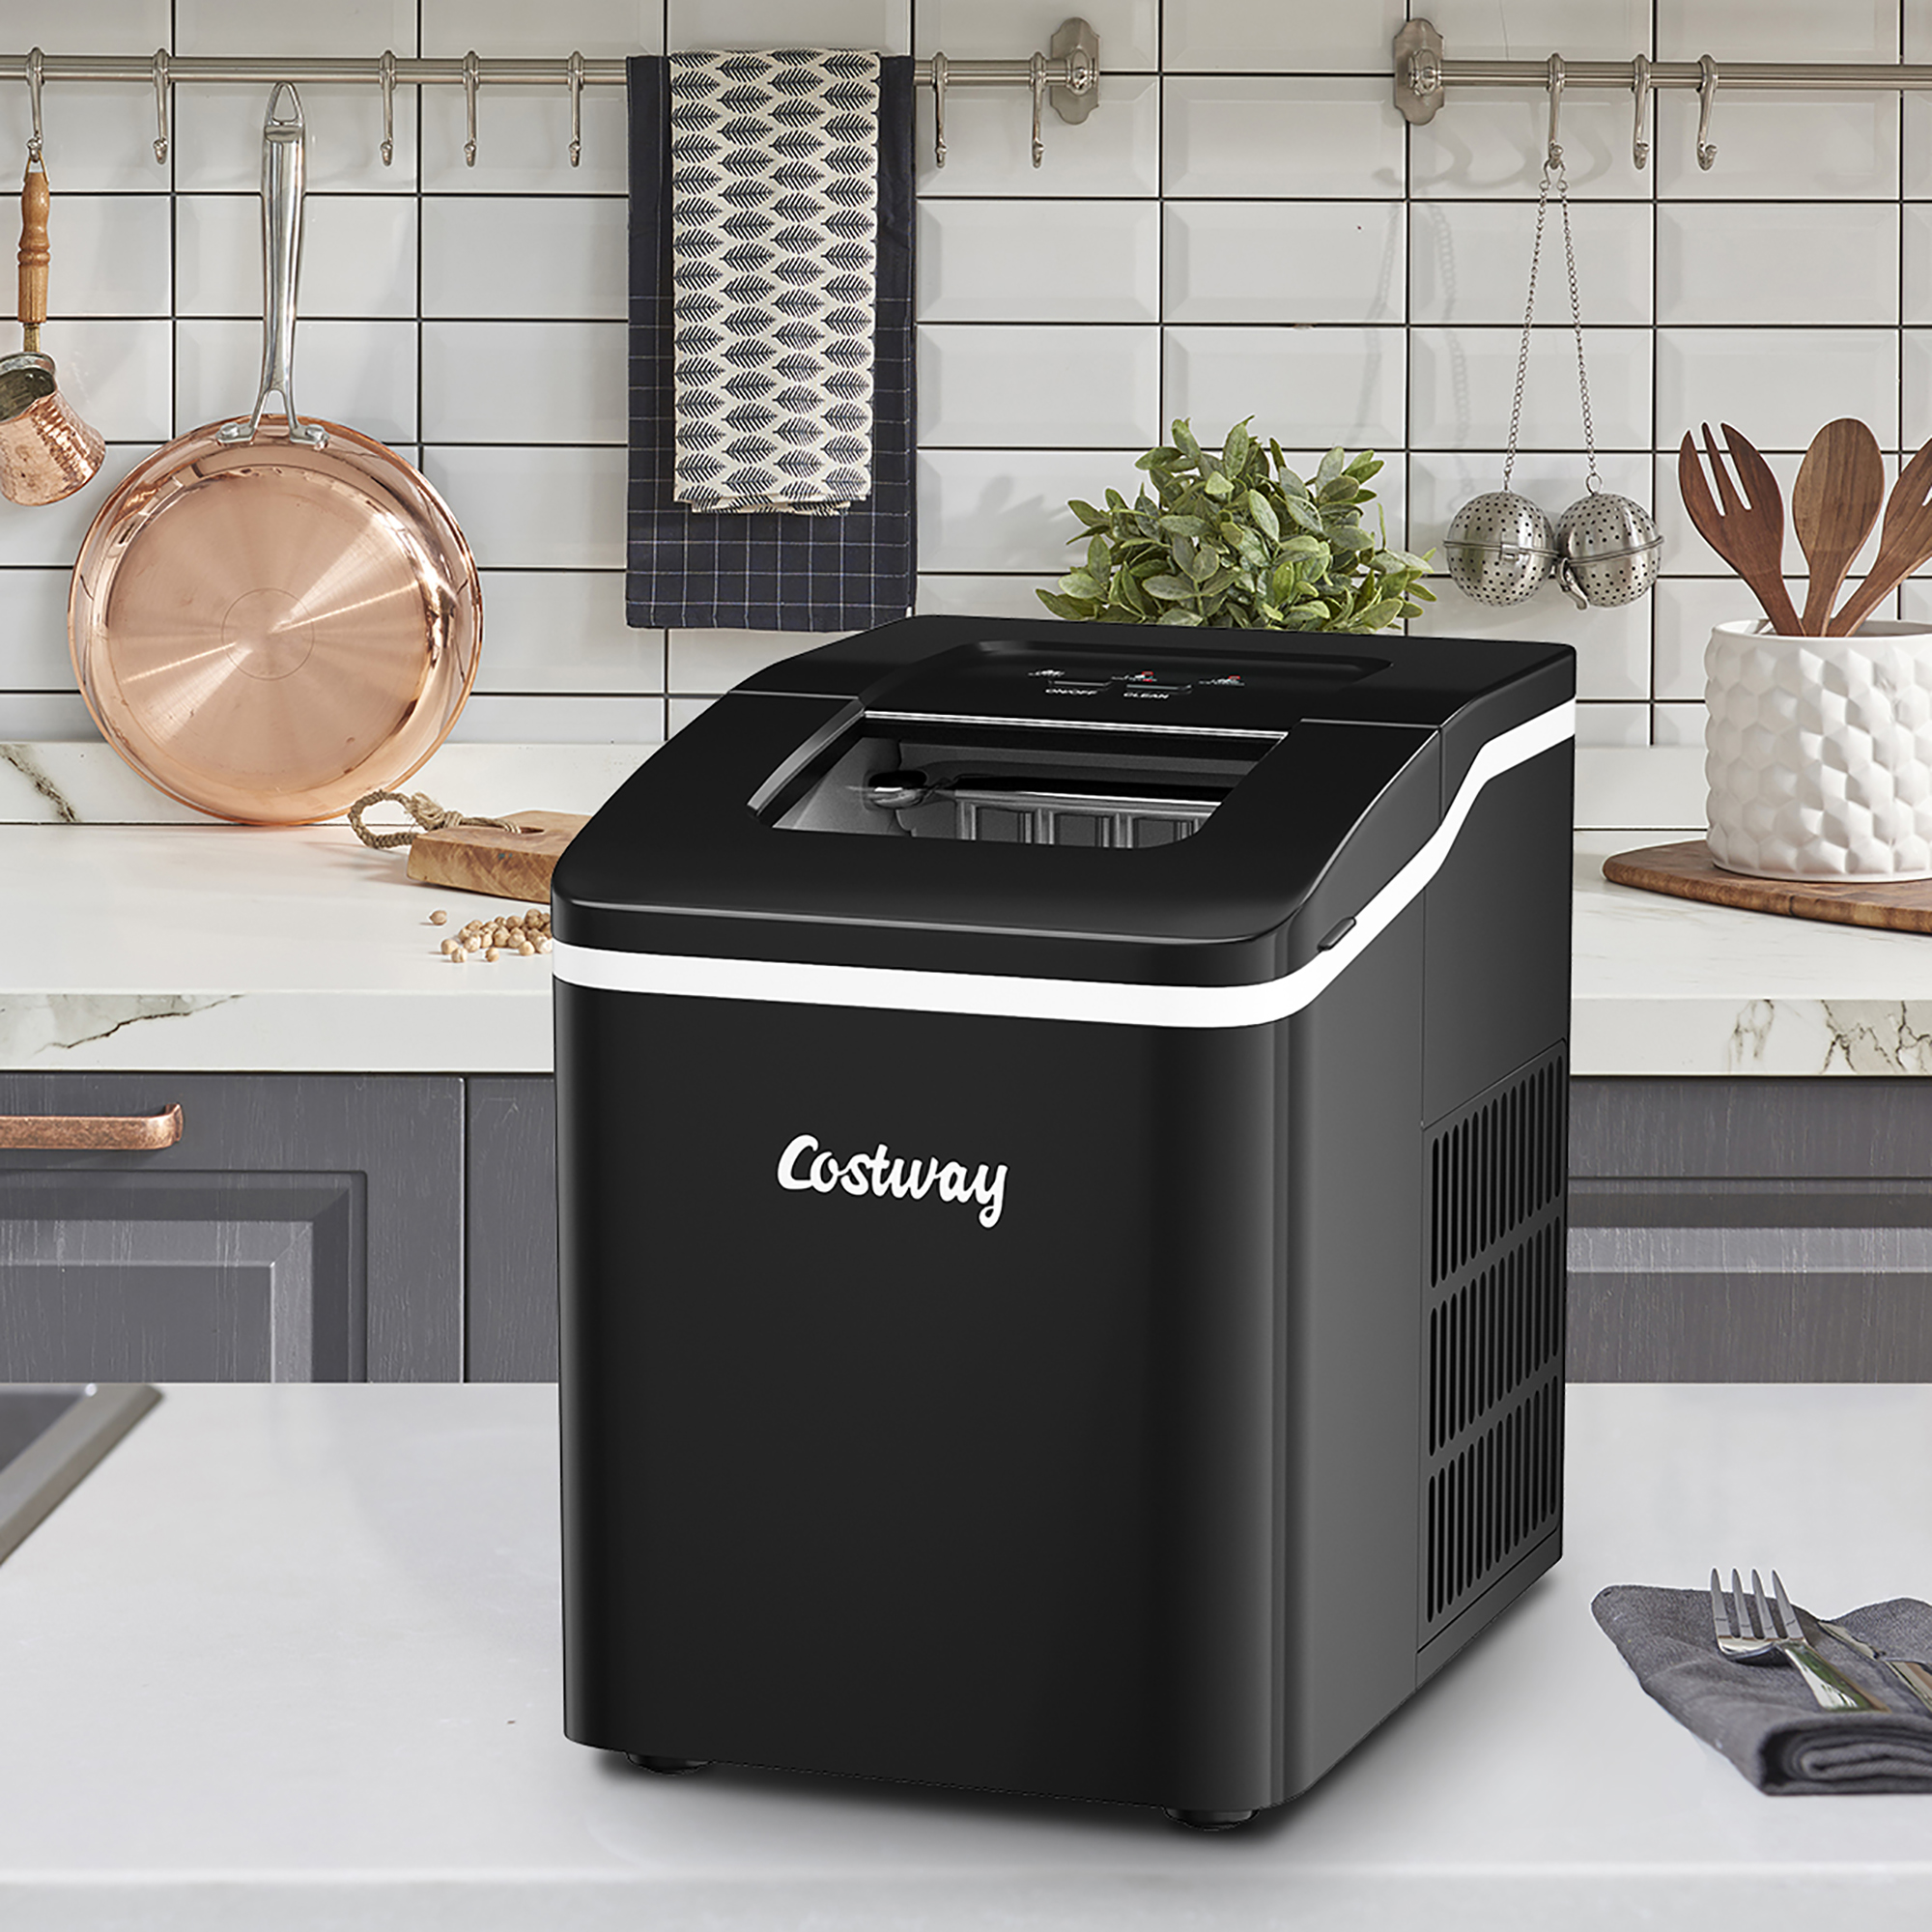 Costway Portable Ice Maker Machine Countertop 26Lbs/24H Self-cleaning w/ Scoop Black - image 9 of 10